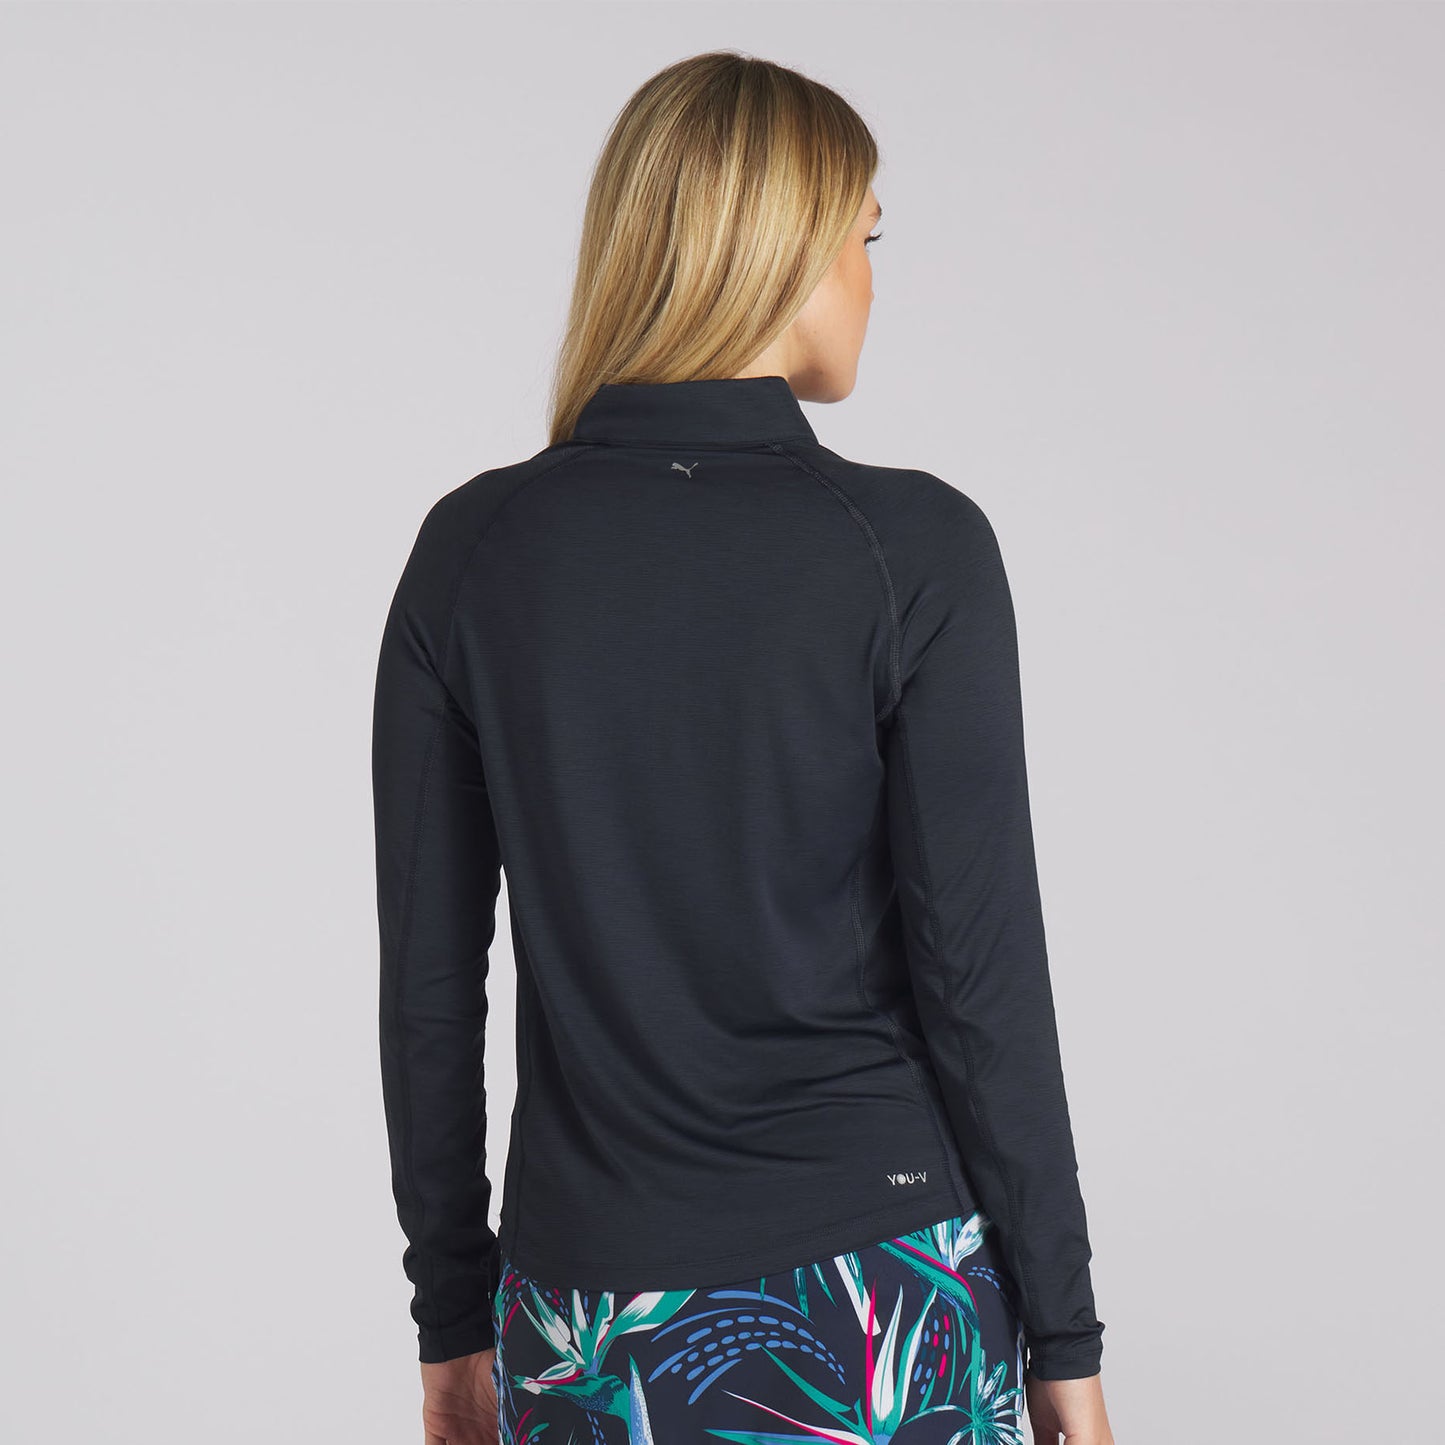 Puma Ladies YOU-V 1/4 Zip Top in Deep Navy with UPF 50+